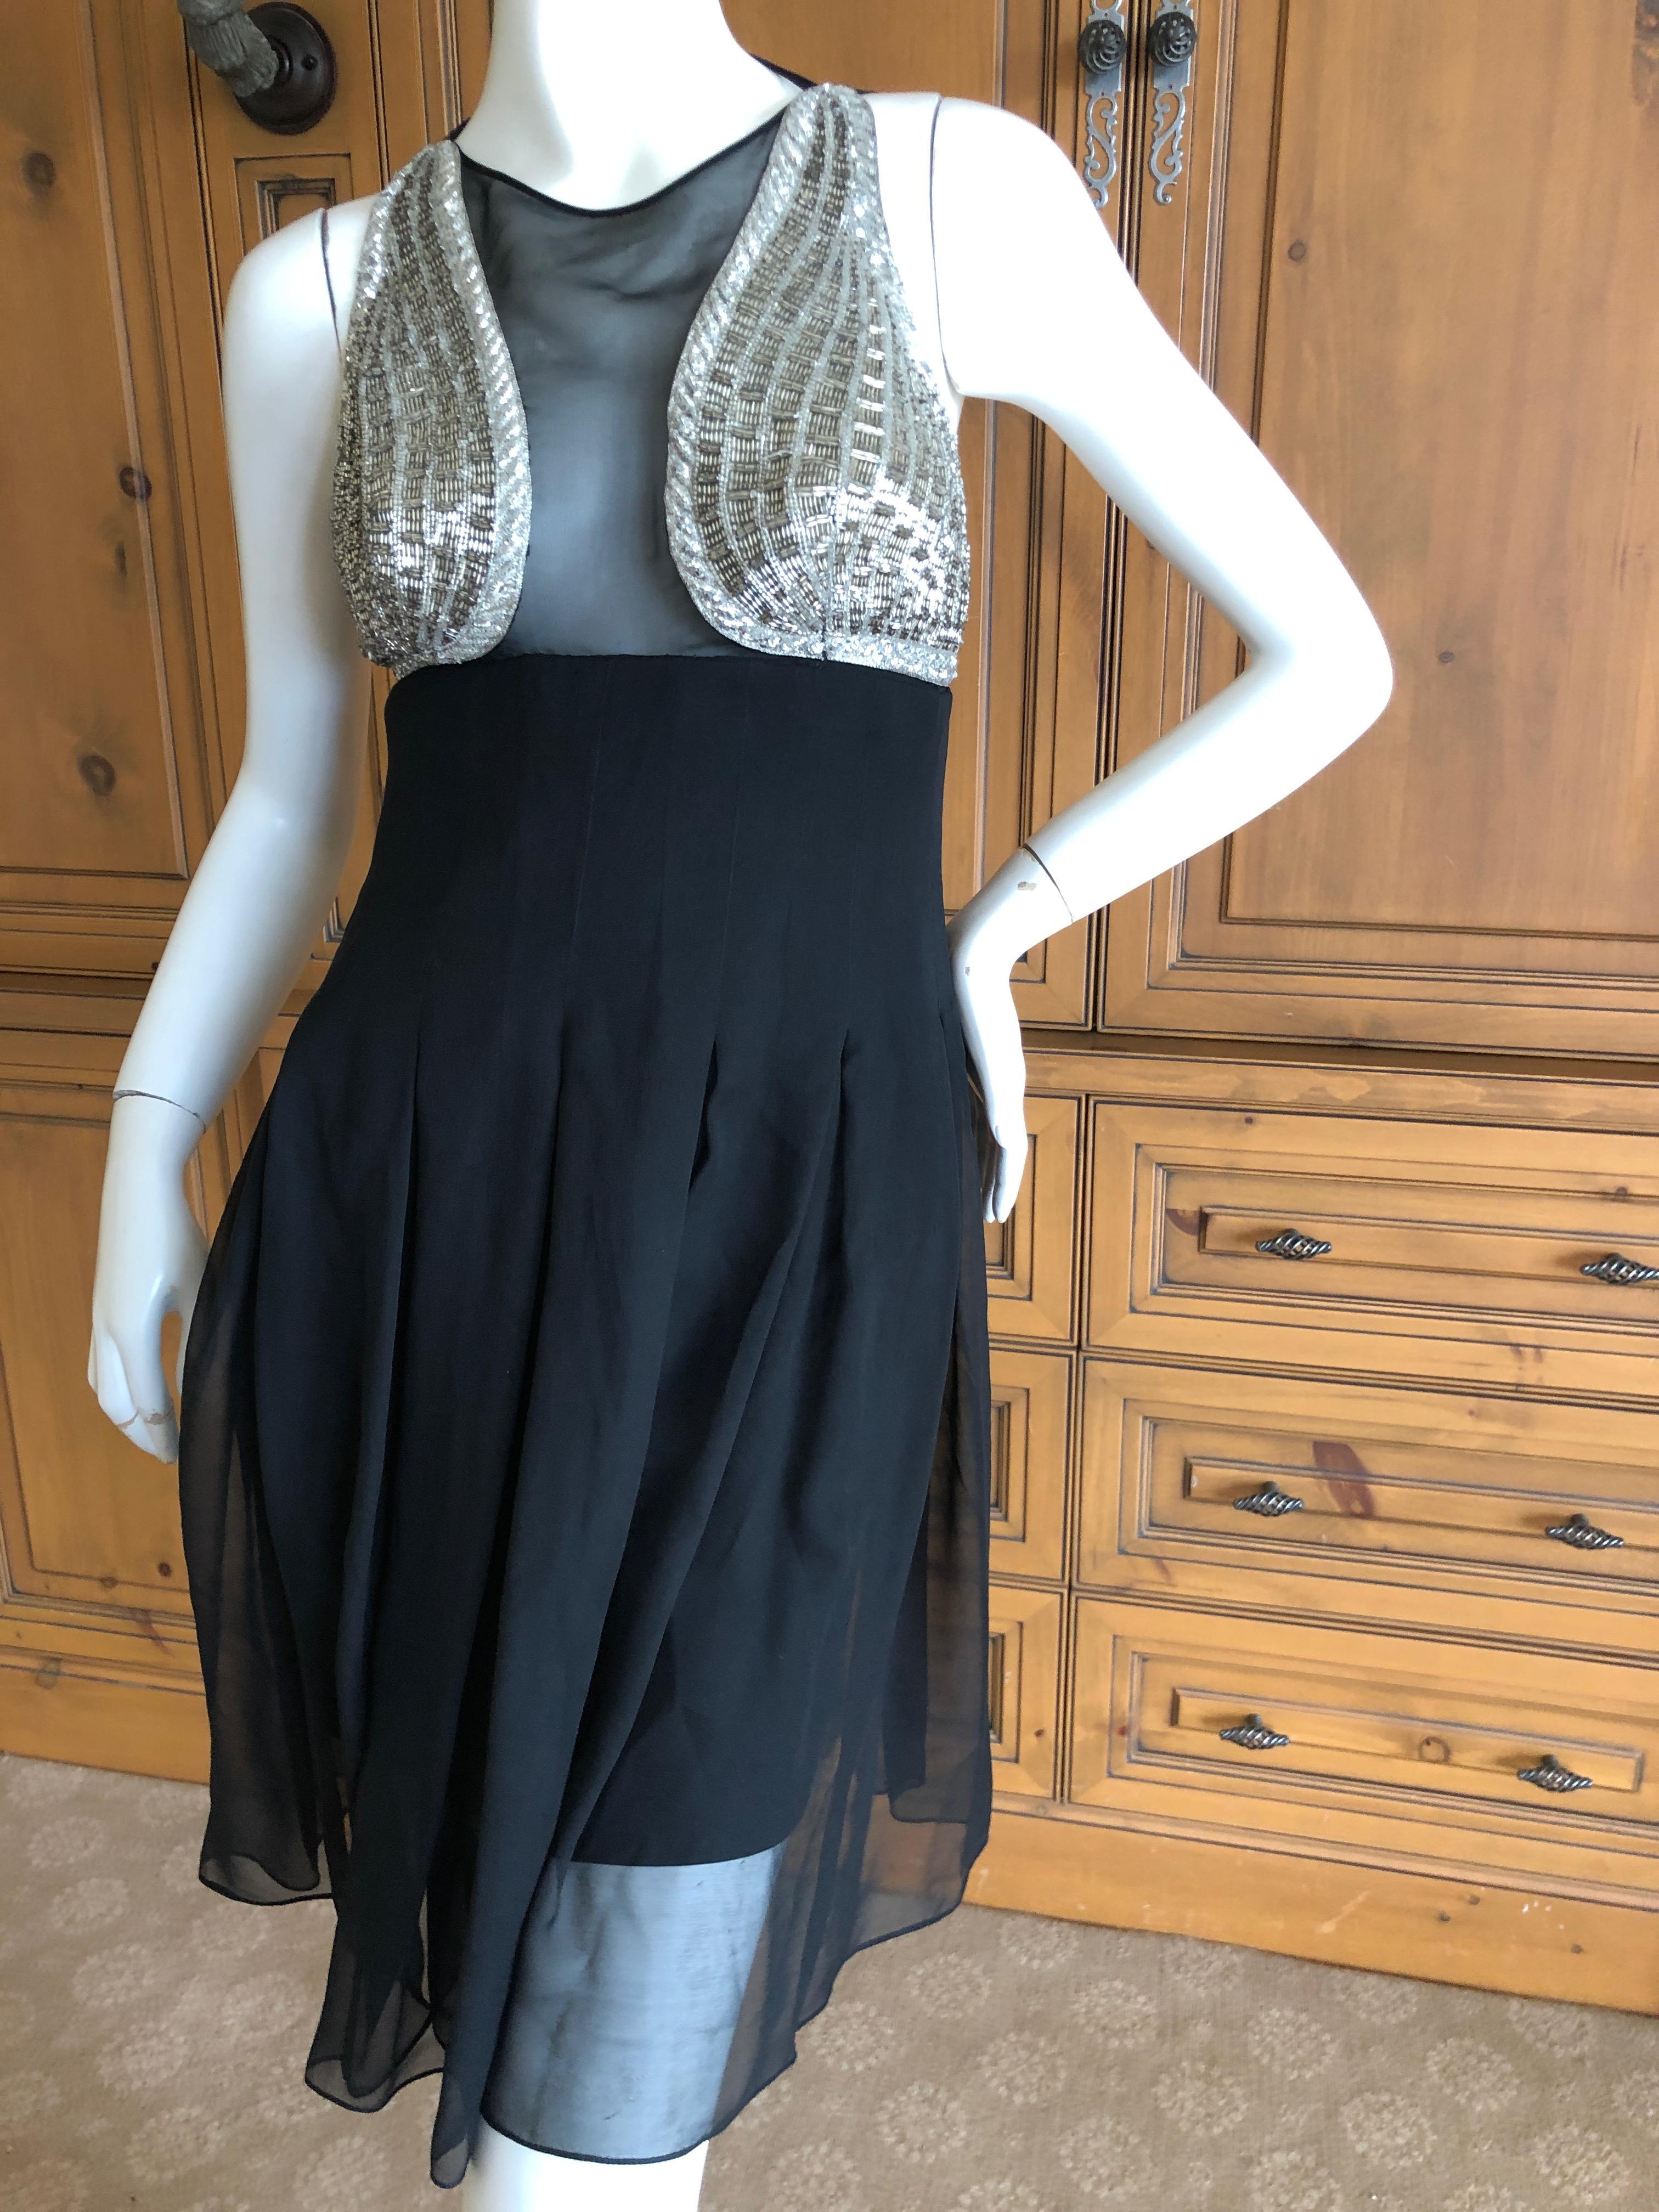 Karl Lagerfeld 1984 Lesage Embellished Babydoll Dress.
In 1984, fresh from his success as being named the designer of Chanel (1983), Karl Lagerfeld put out his first signature collection, at a very high price level.
The workmanship was on par with